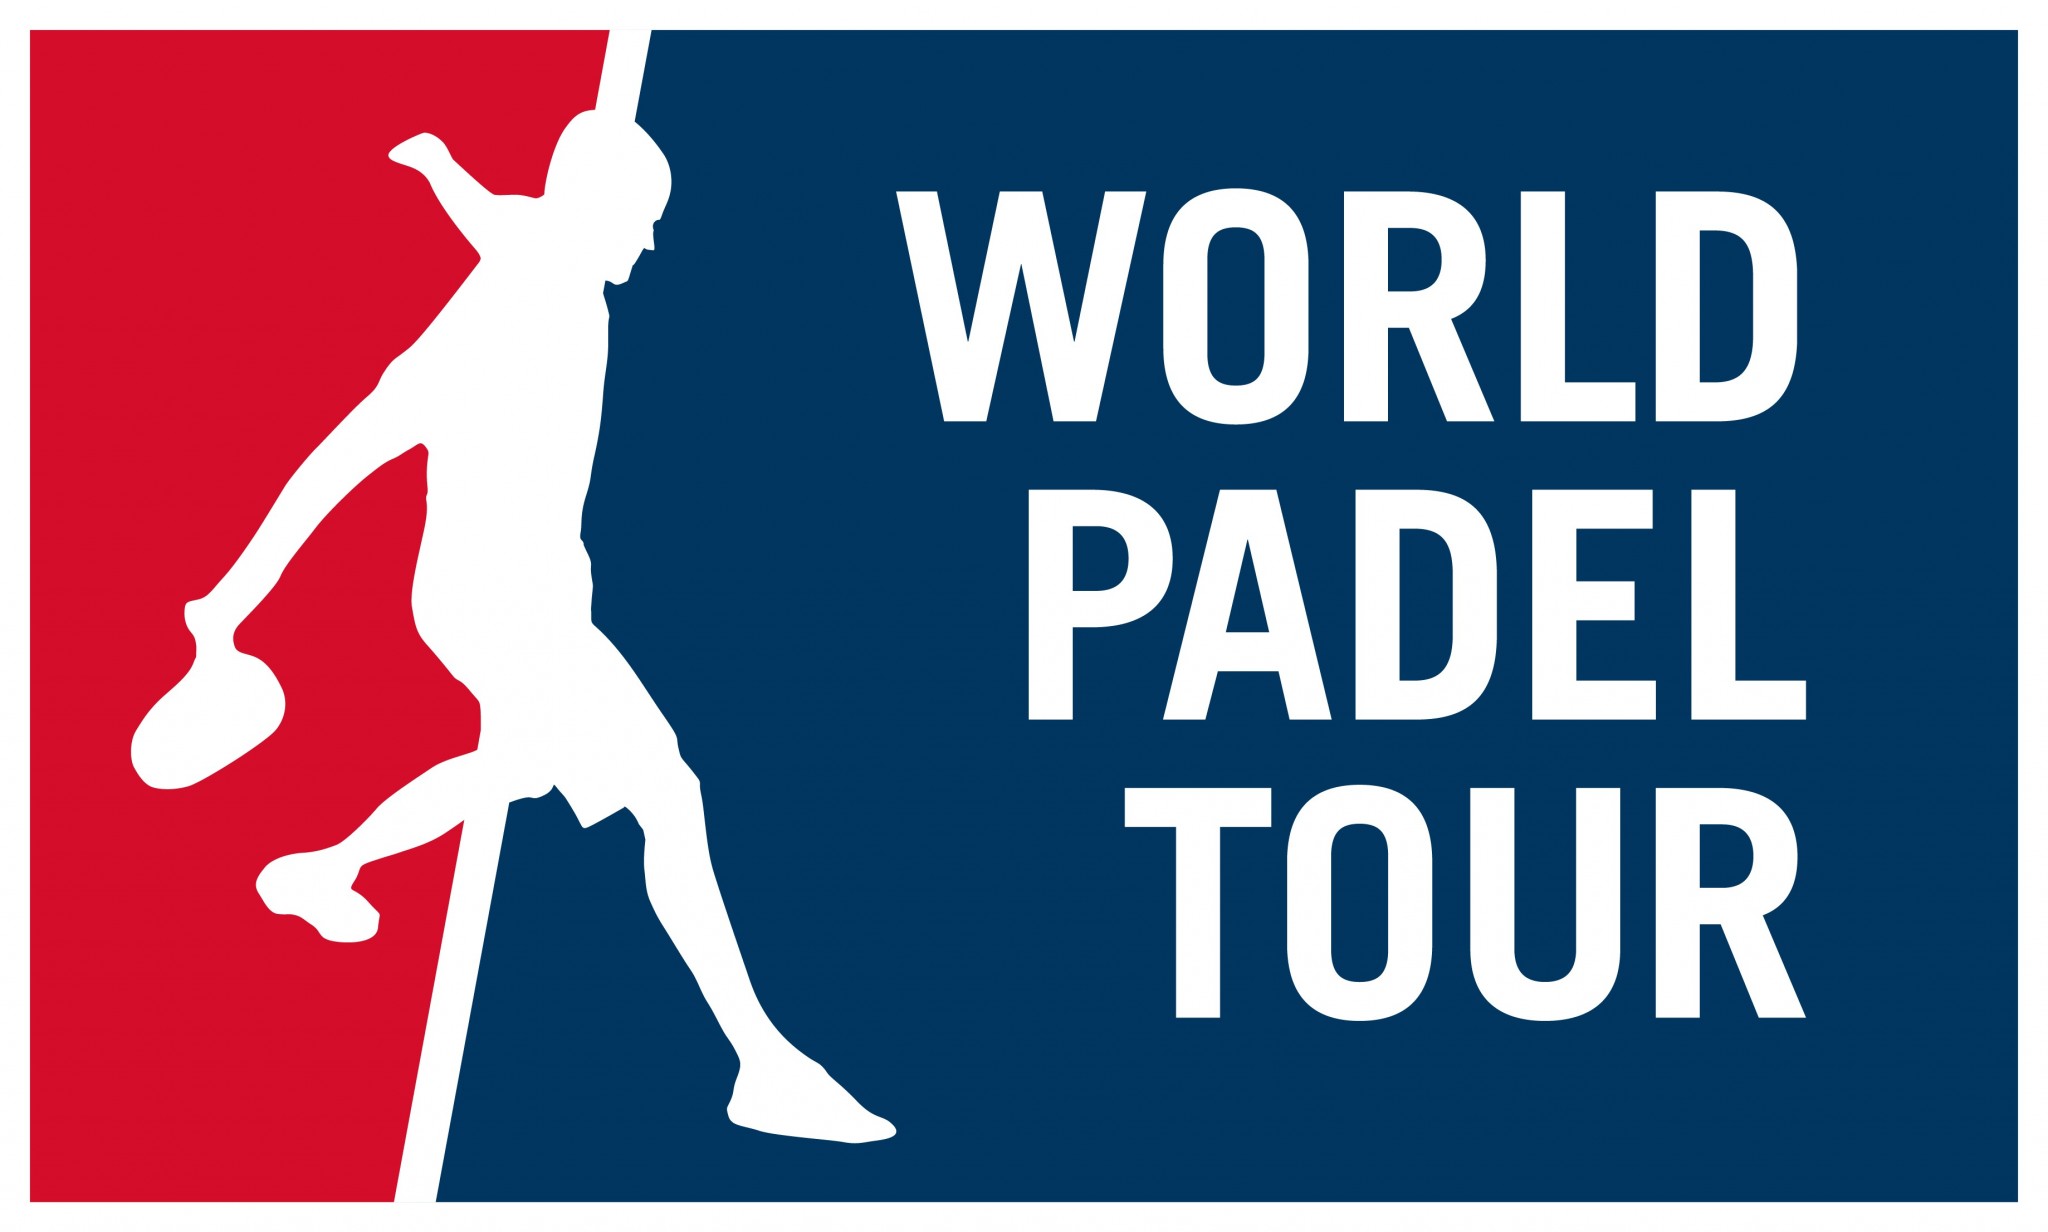 World Padel Tour analyzes the 2018 results